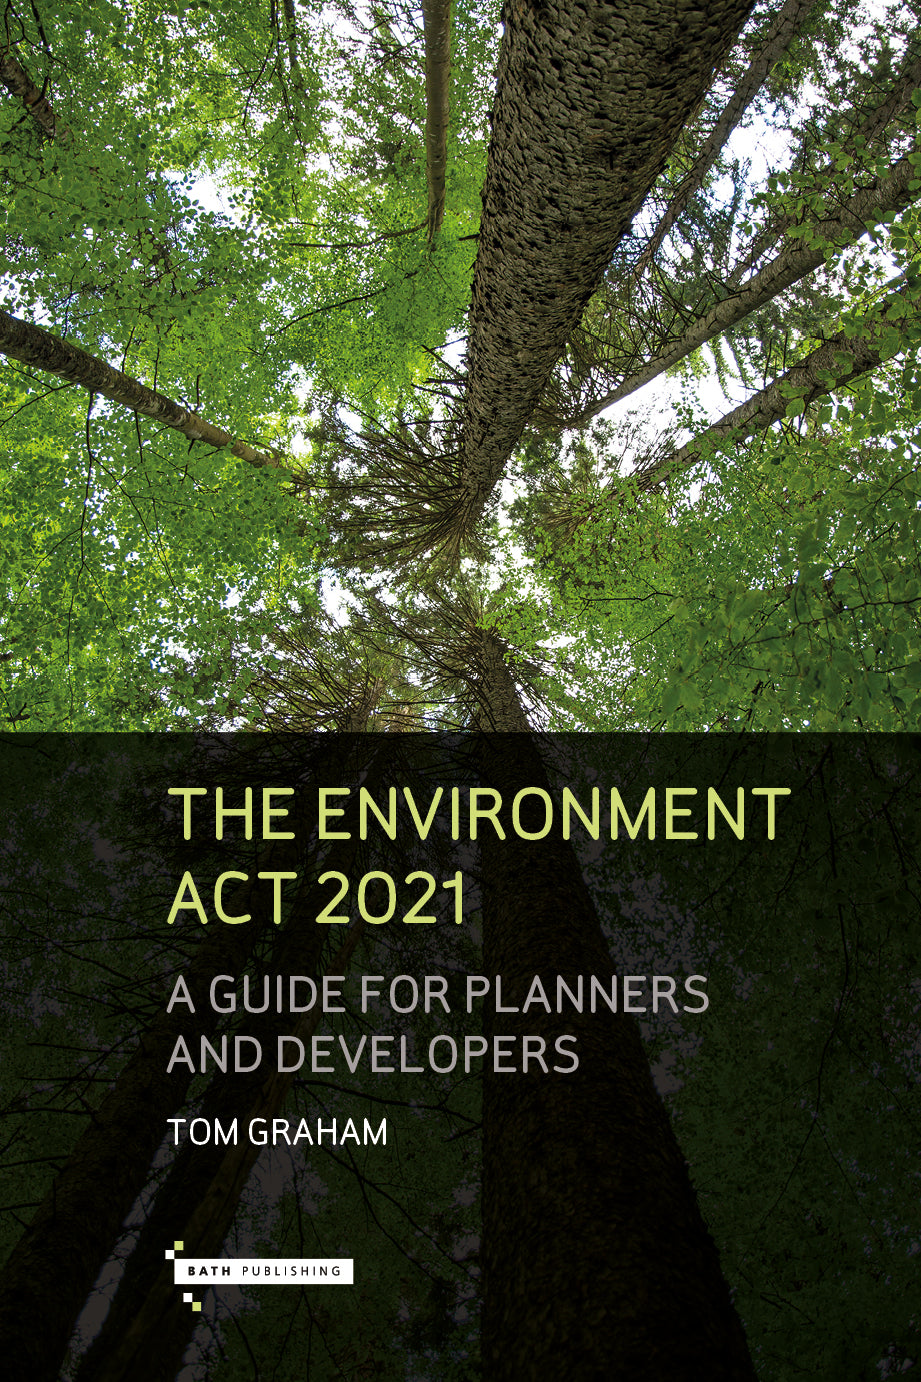 Coming soon: The Environment Act 2021: A Guide for Planners and Developers